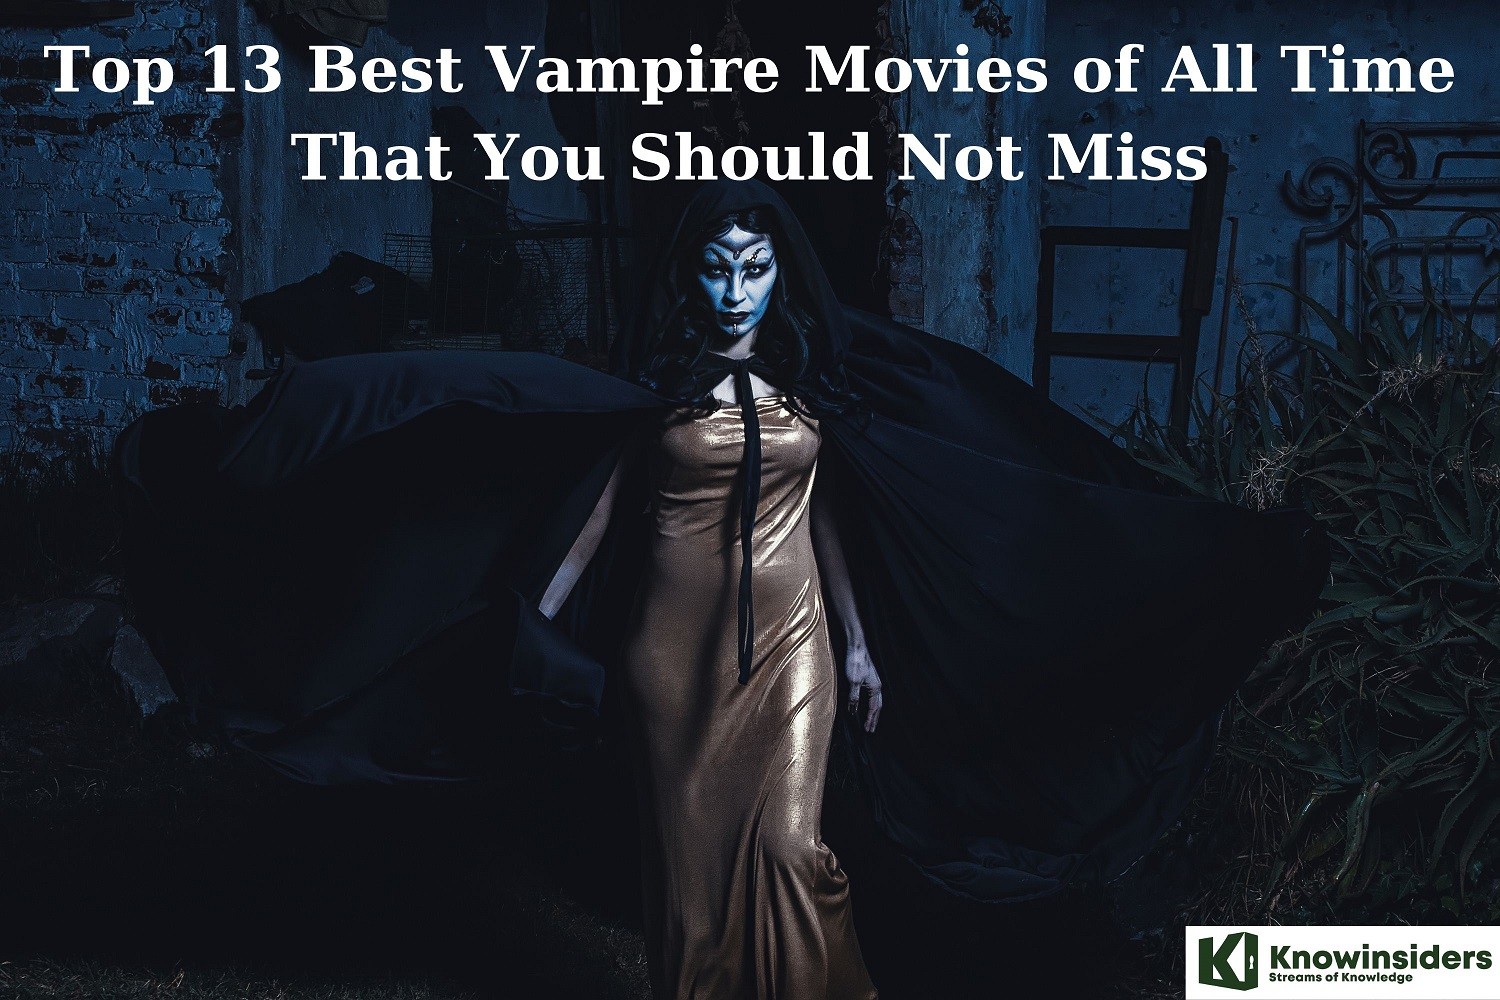 Top 13 Best Vampire Movies of All Time That You Should Not Miss